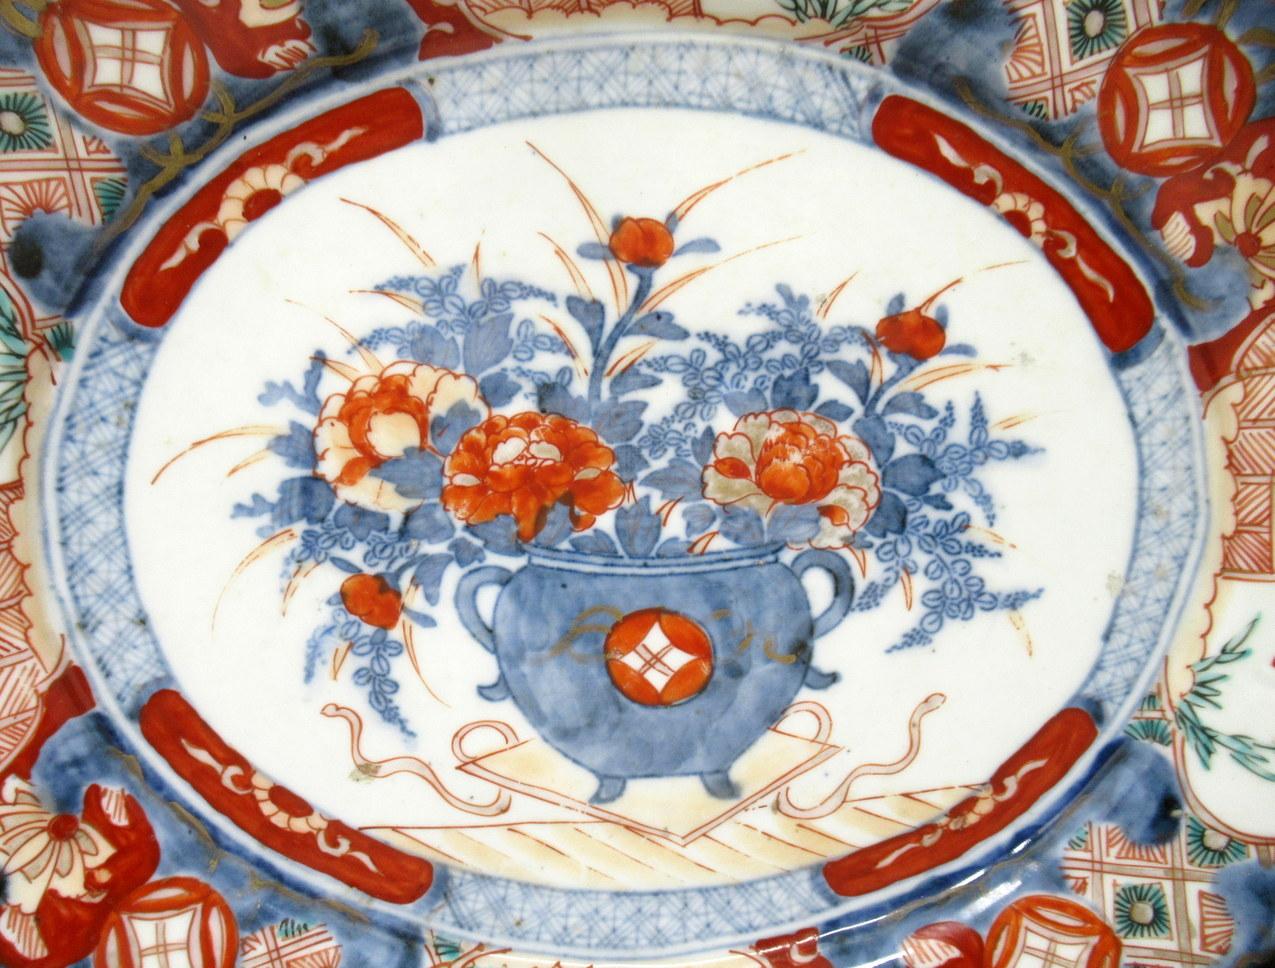 Anglo-Japanese Antique Japanese Meji Hand Painted Imari Dish Centerpiece Plate Cobalt Blue Red